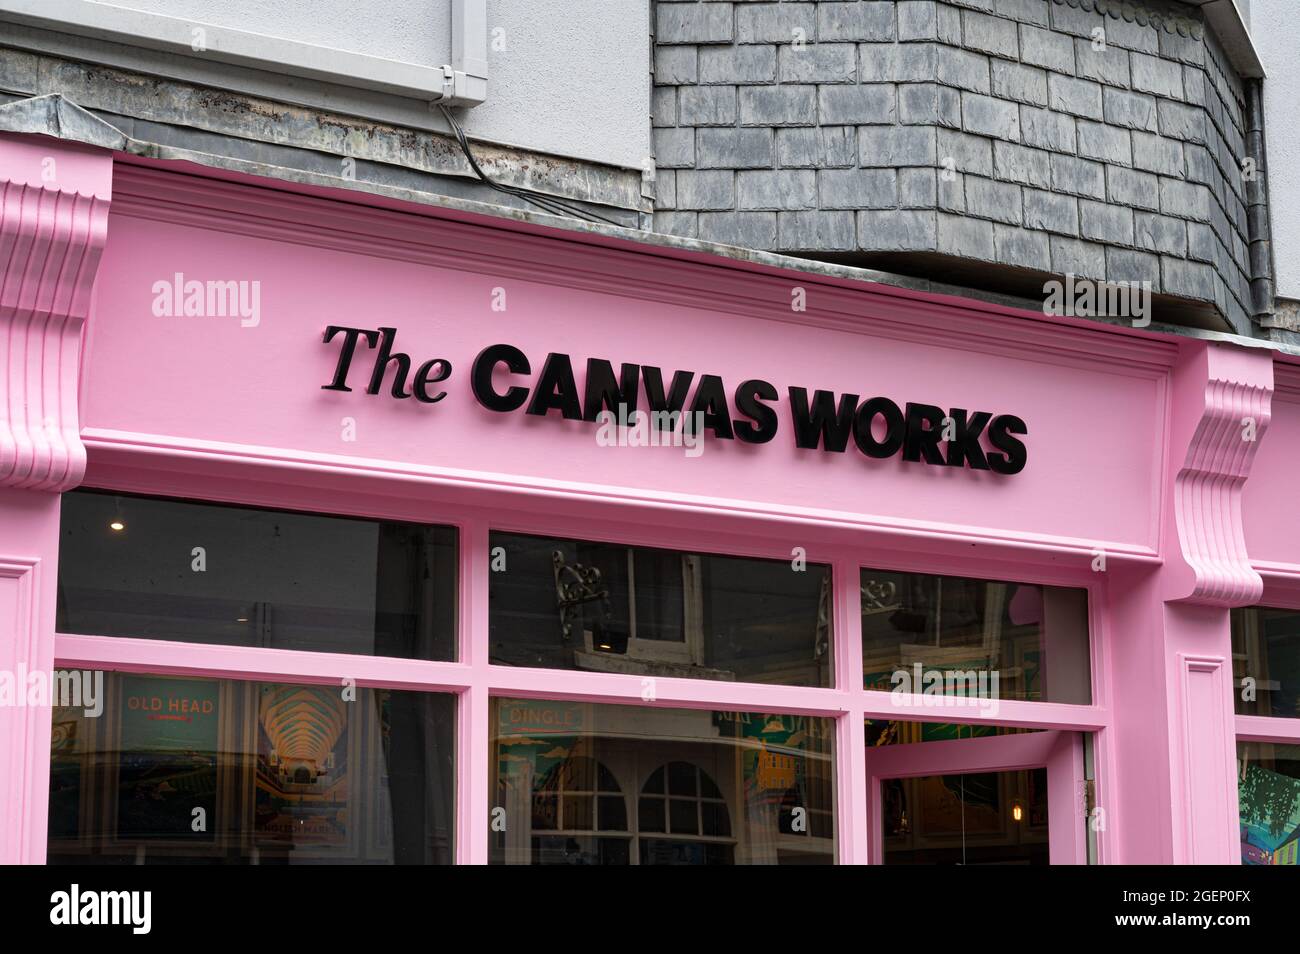 Kinsale, Ireland- July 13, 2021: The sign for The Canvas Works in Kinsale Stock Photo